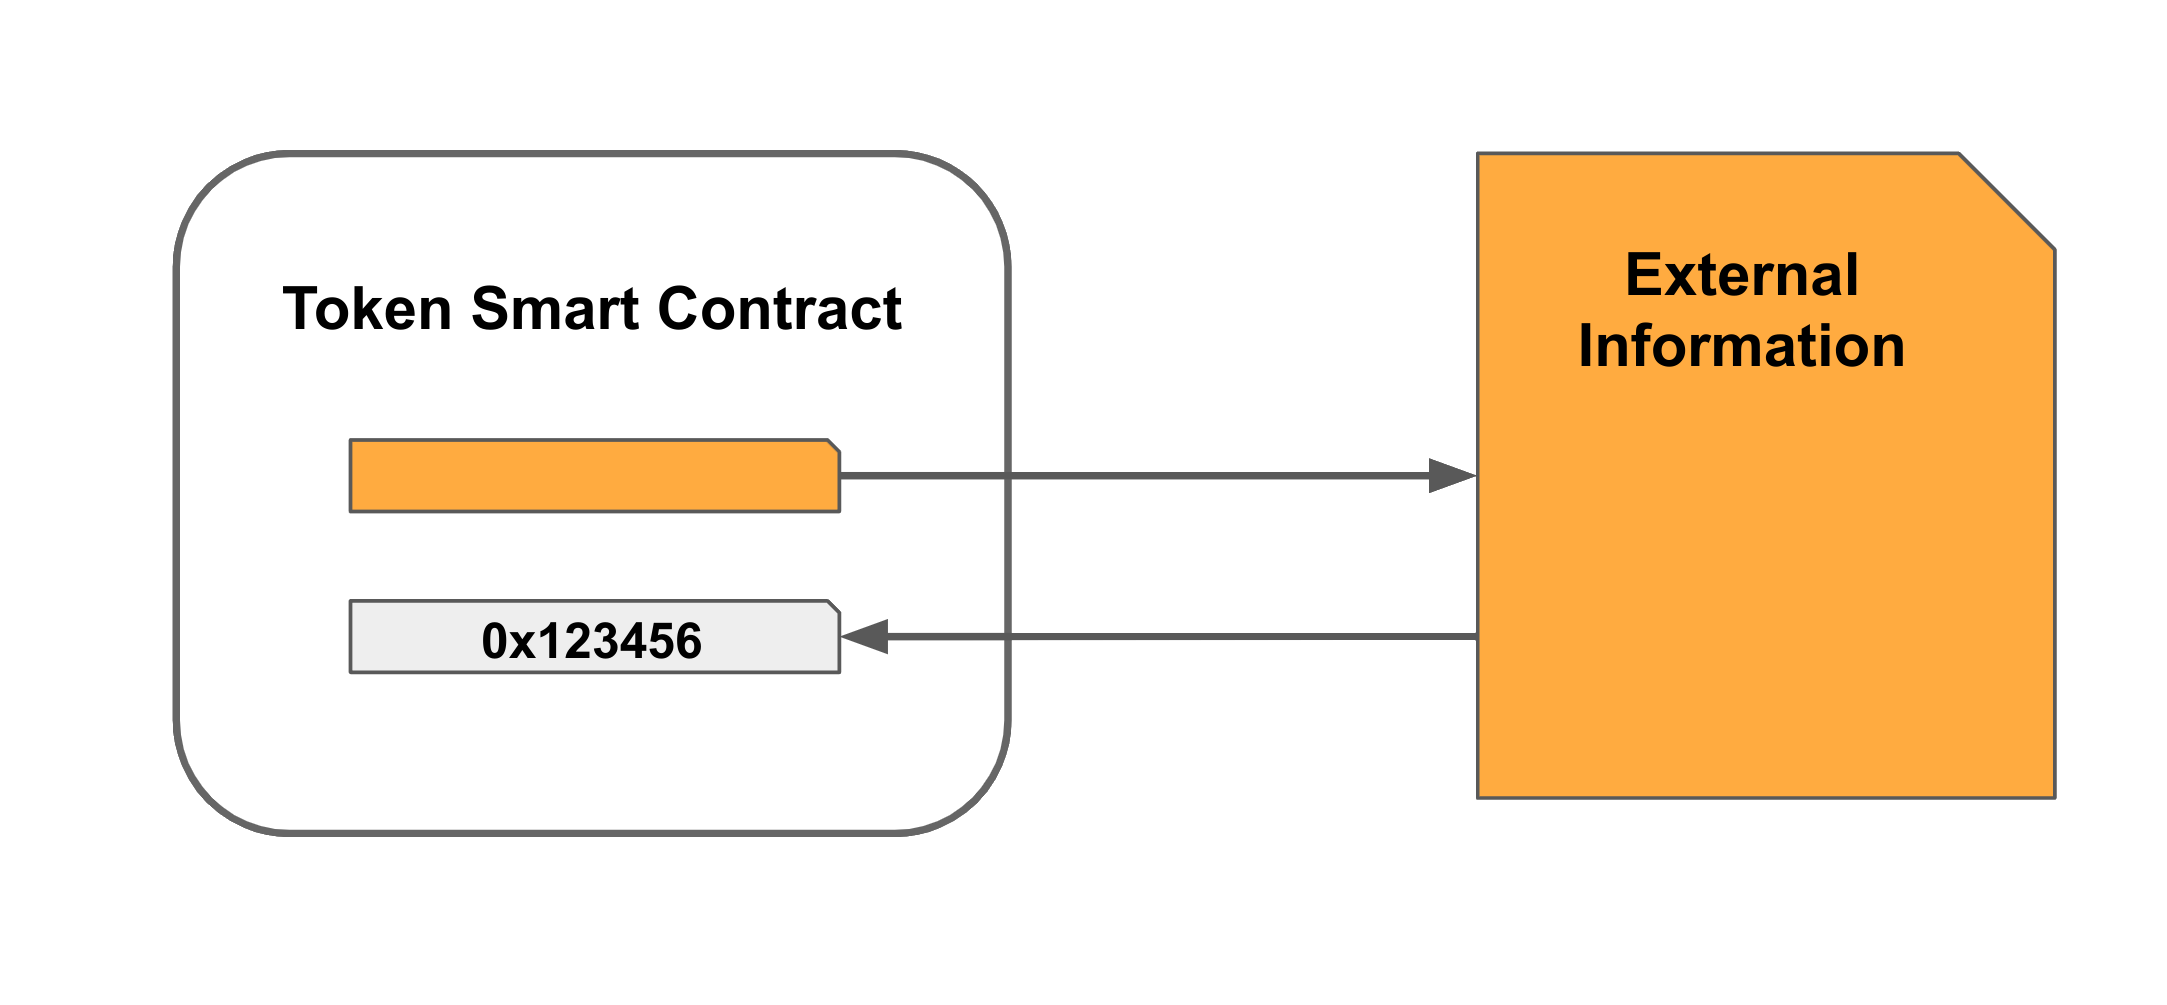 Abstract representation of a token smart contract and its external documentation